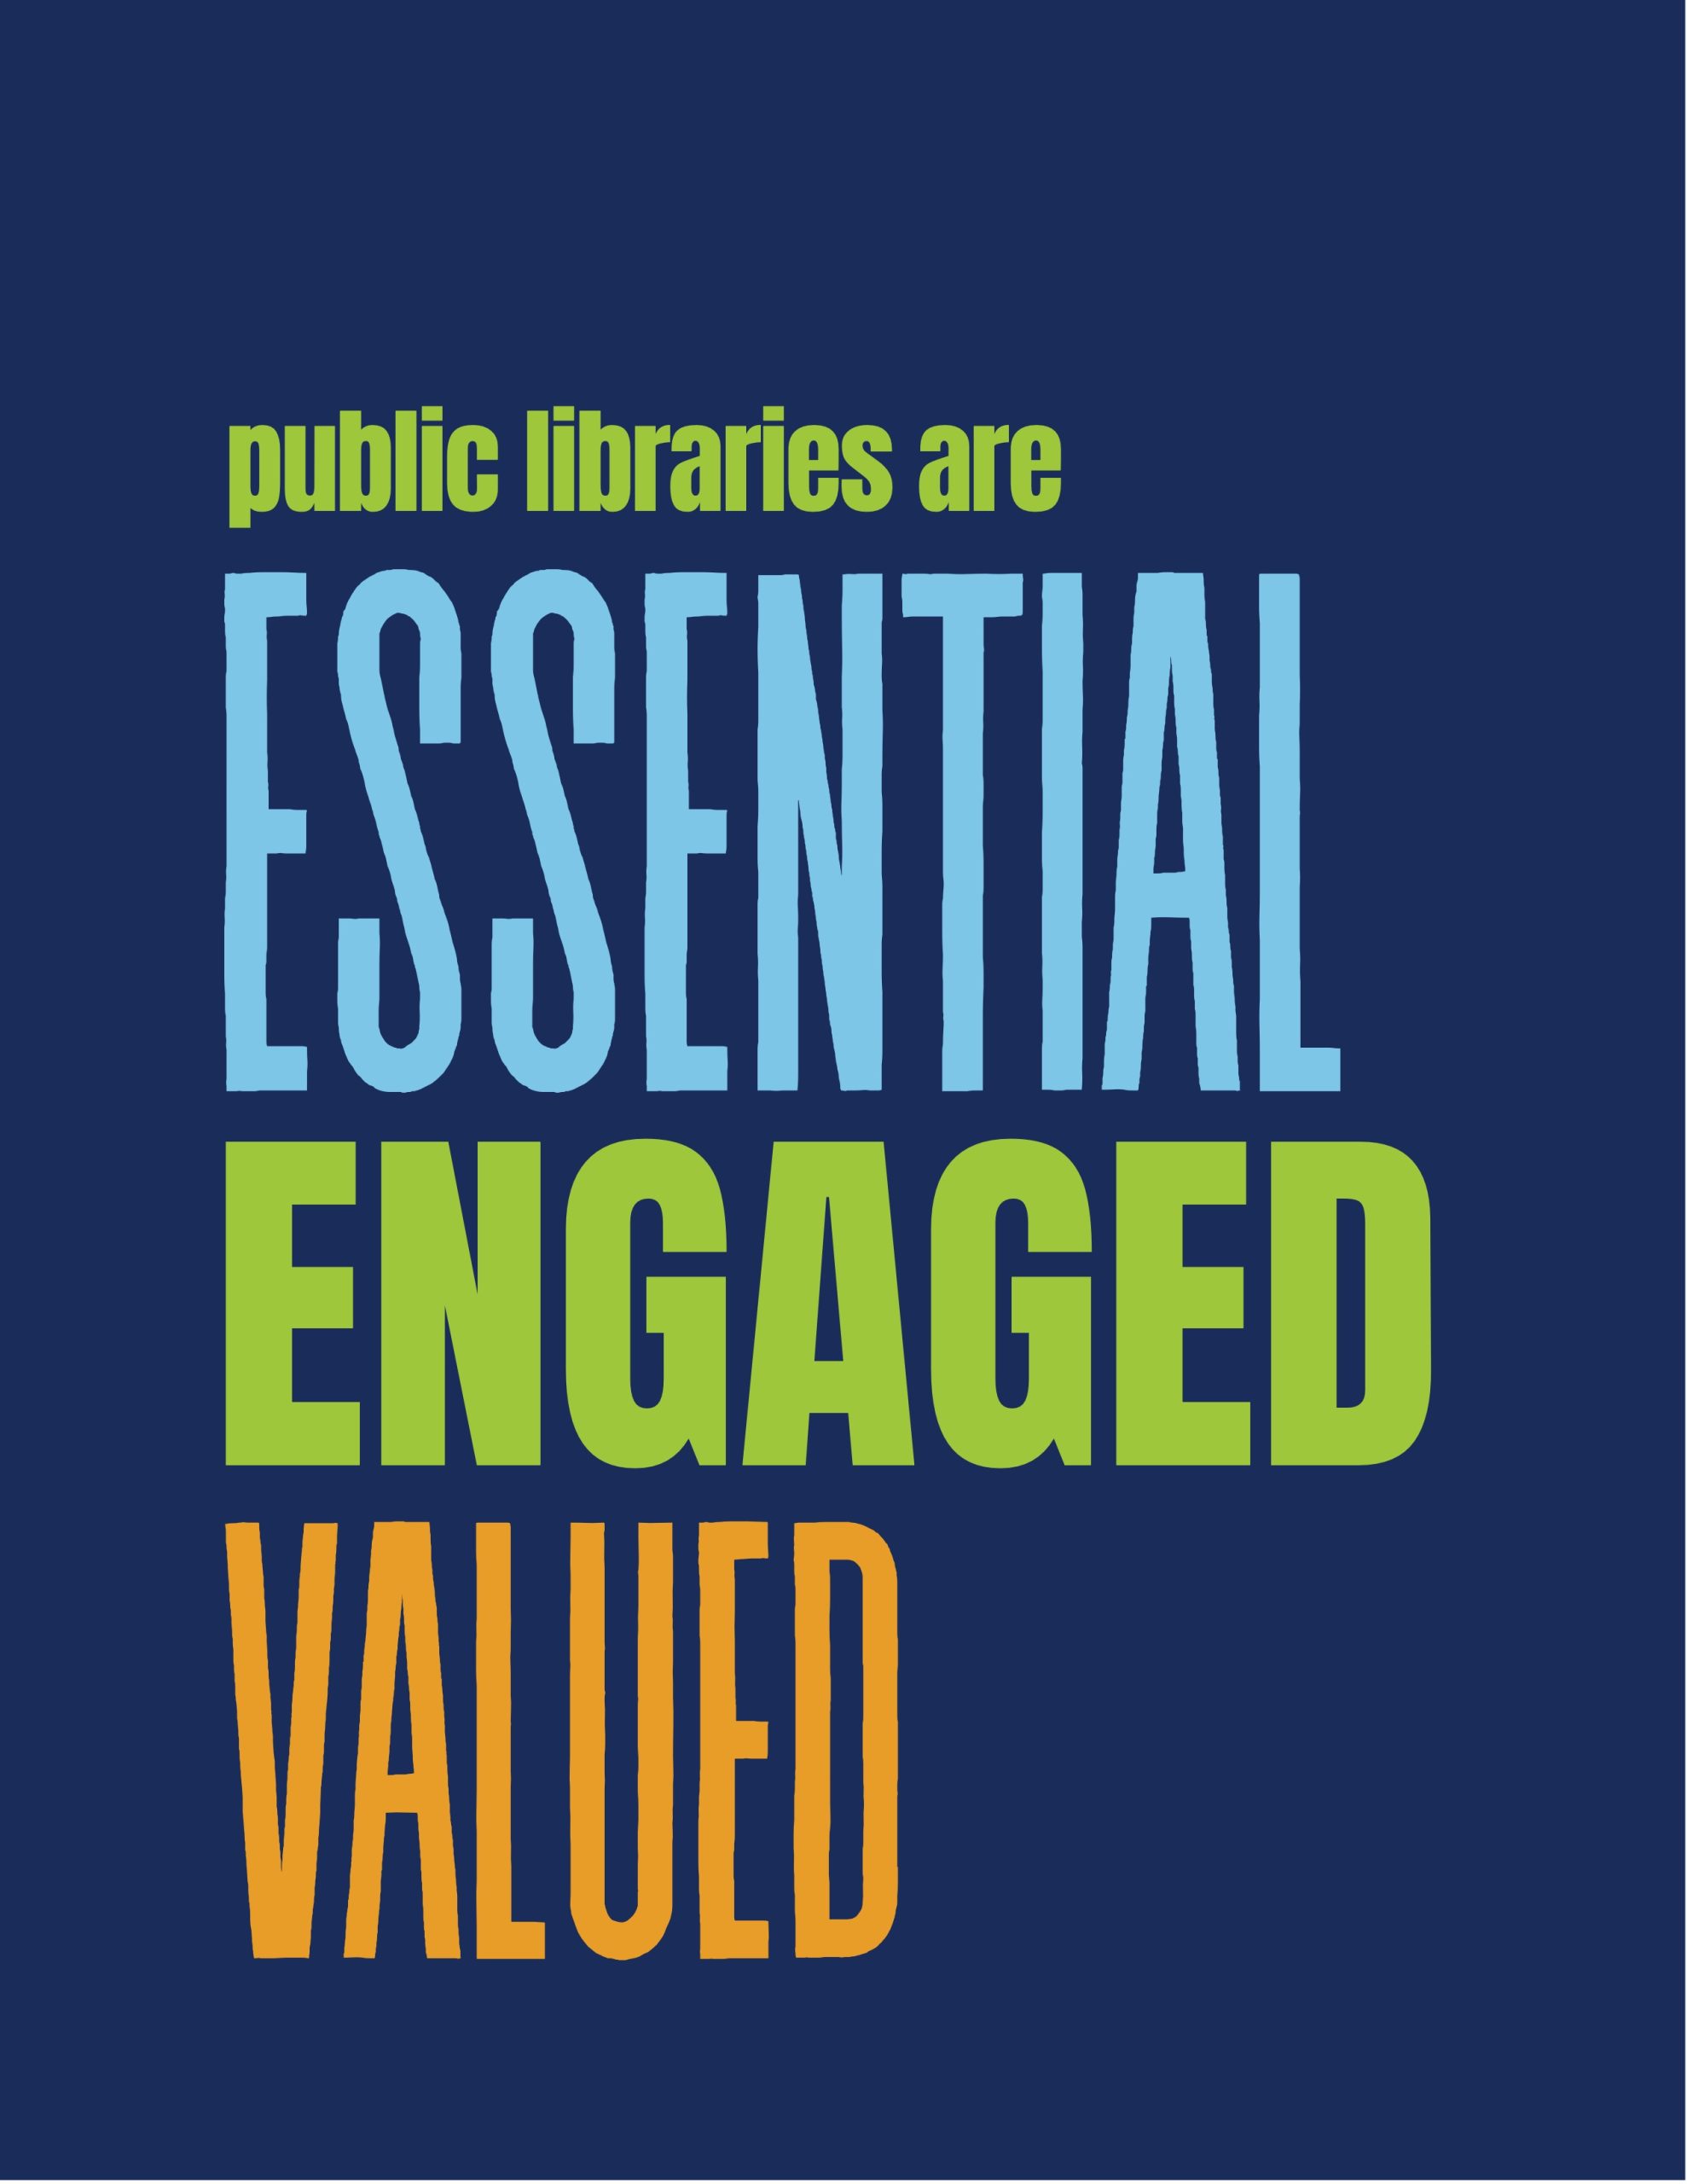 Public Libraries are Essential, Engaged, Valued